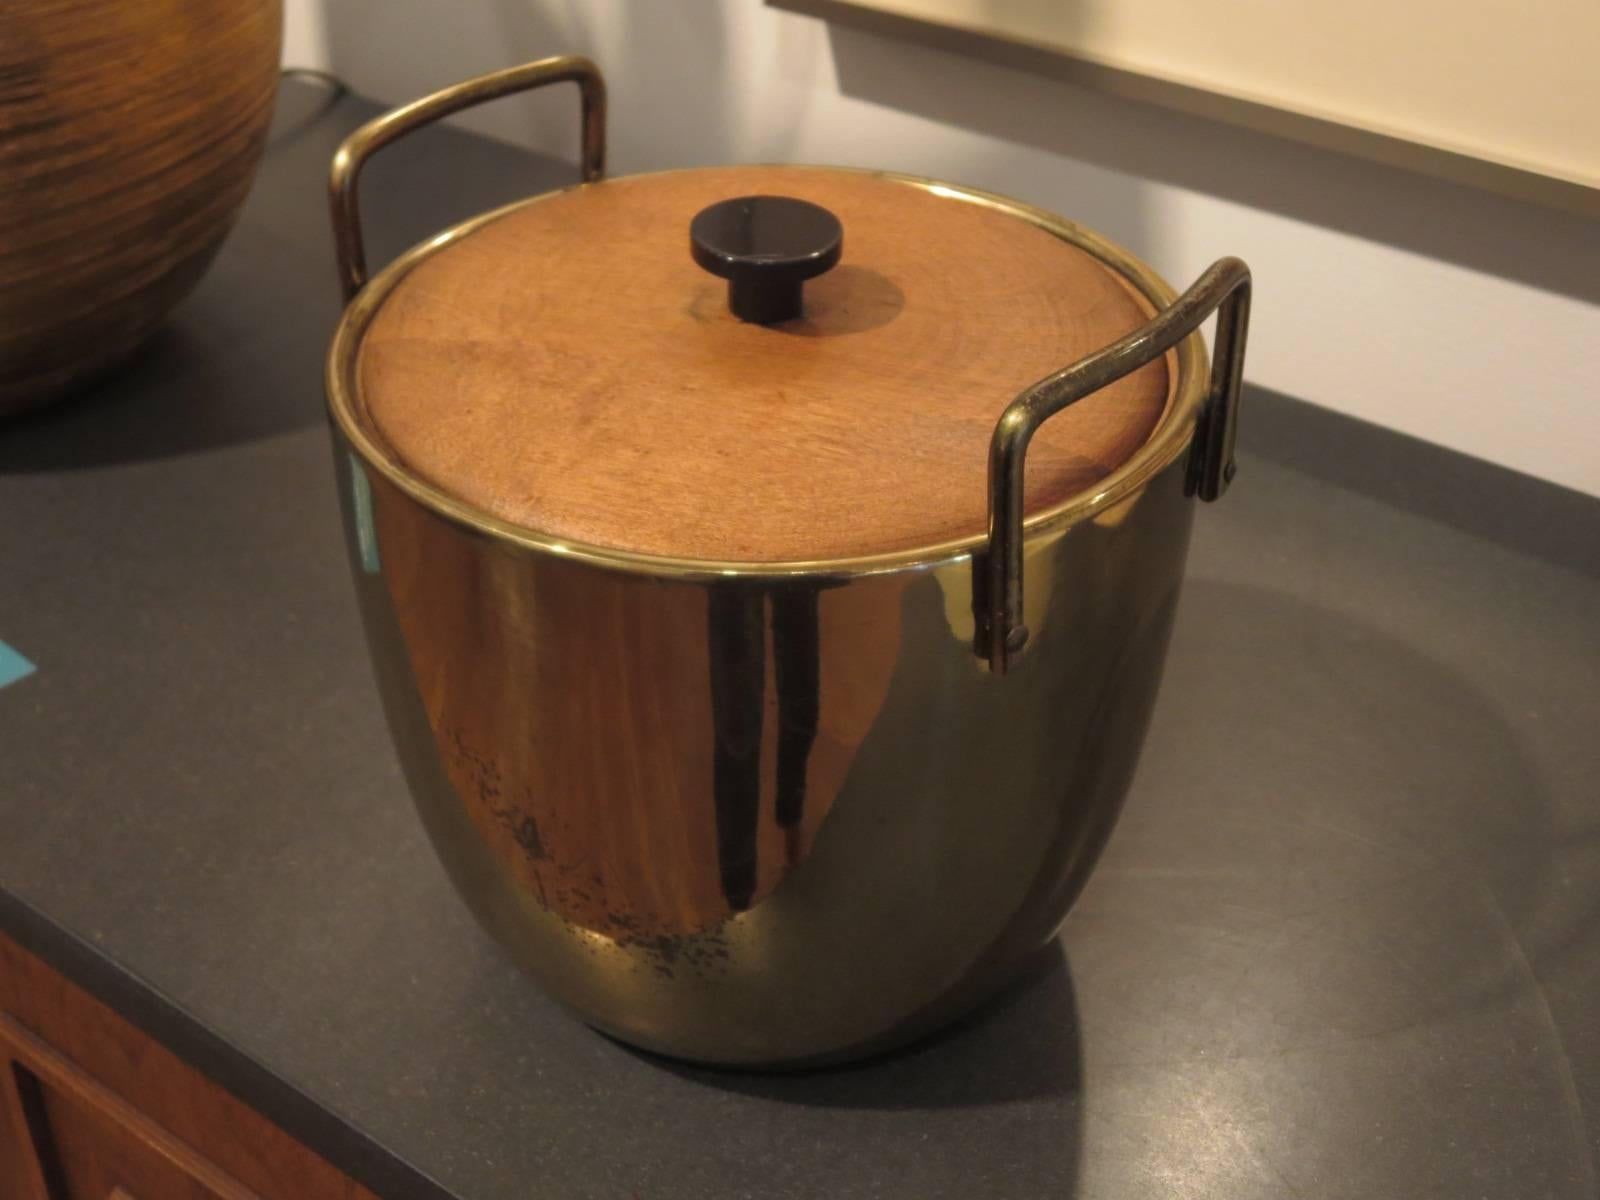 Two handled wood and brass ice bucket by Ben Seibel.